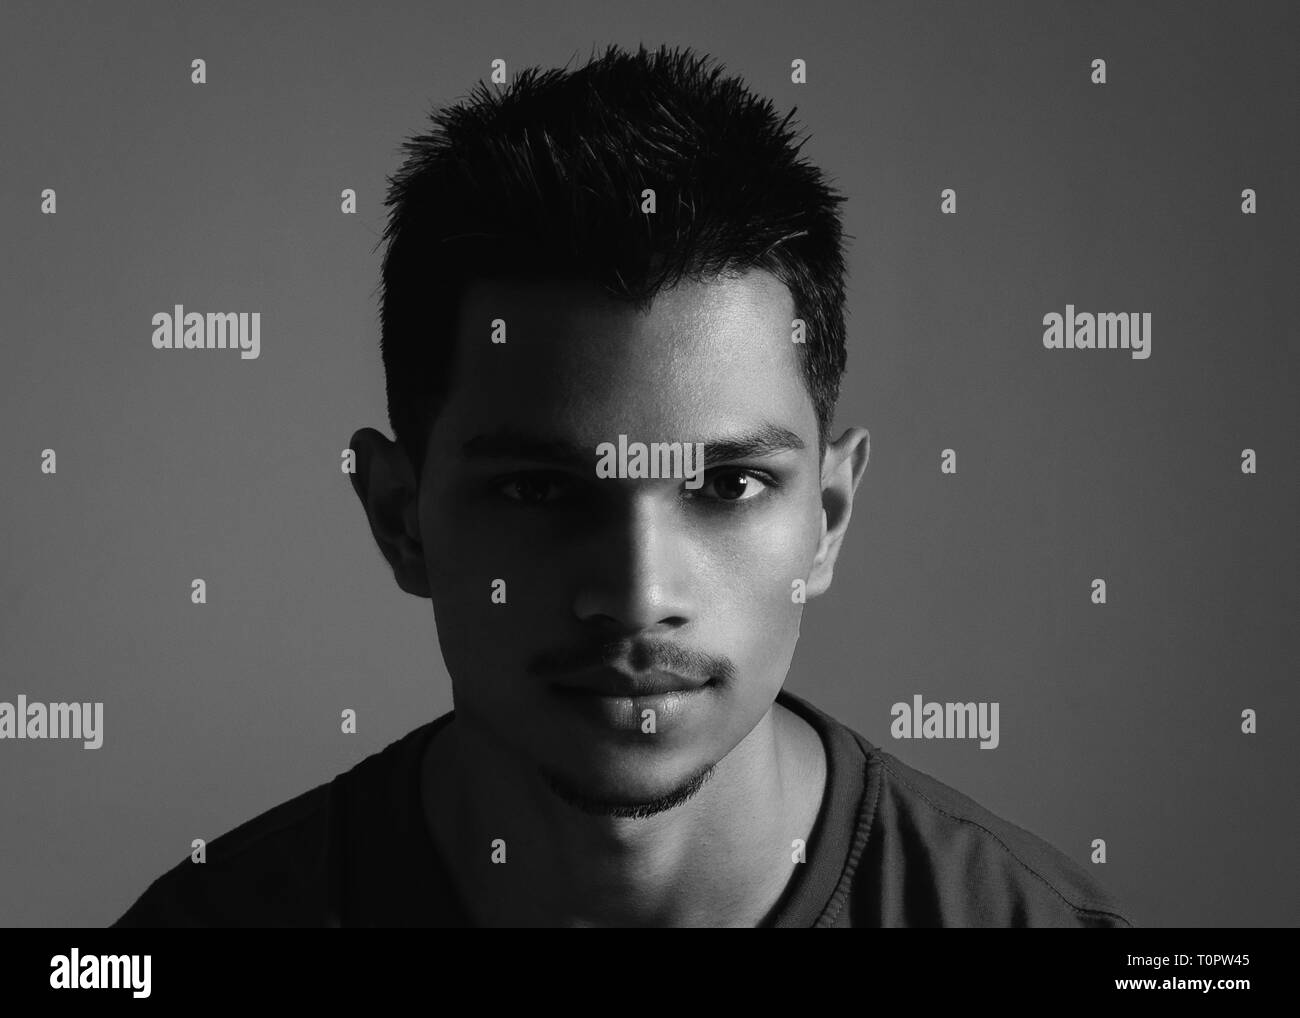 Black and white, headshot, portrait of a 22 years old Indian boy on a plain white background using split lighting. Stock Photo